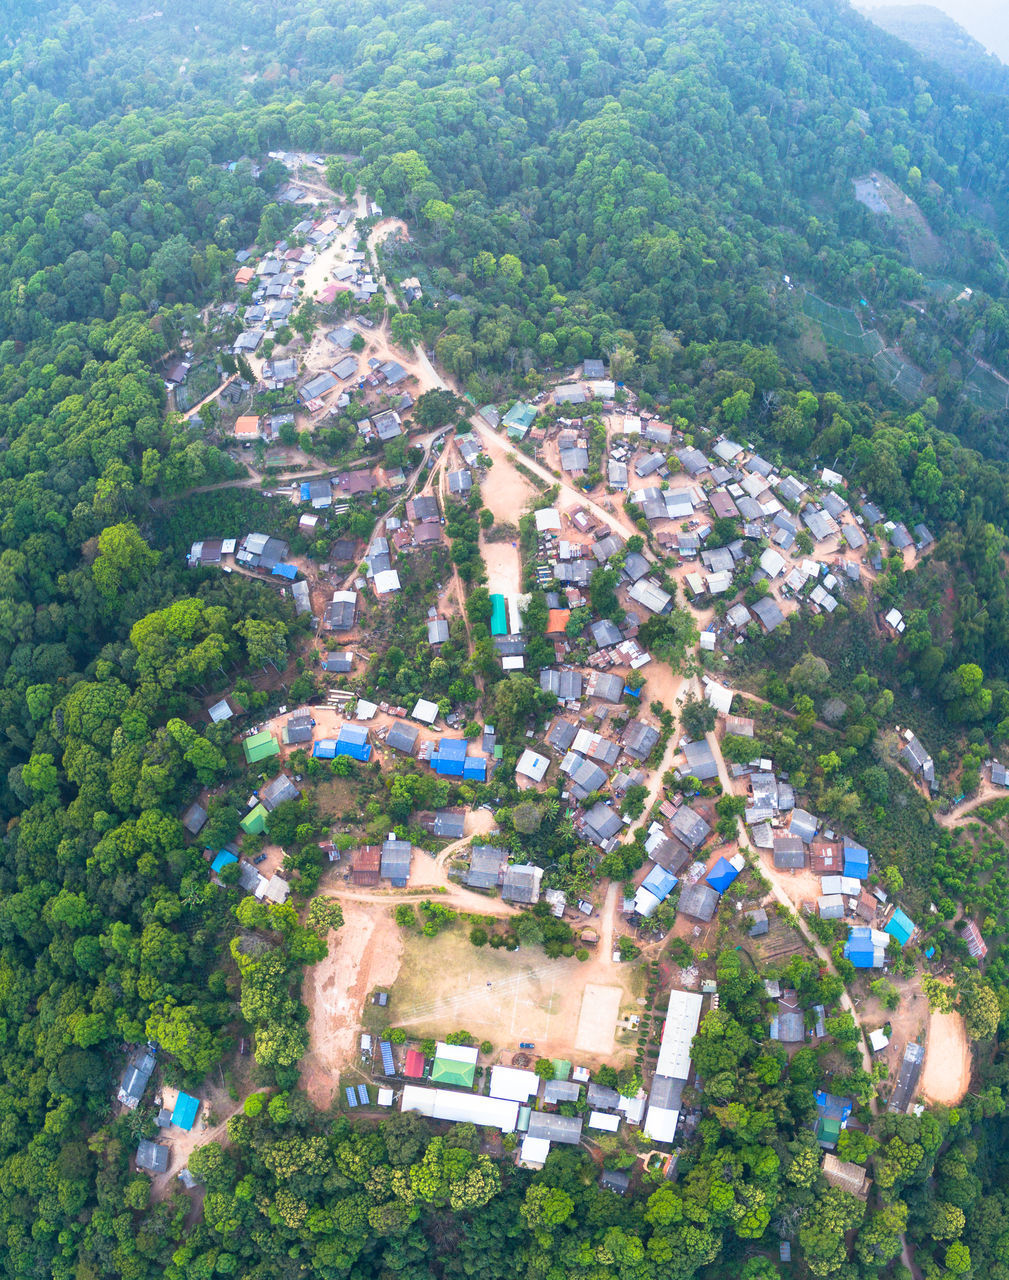 HIGH ANGLE VIEW OF HOUSES IN TOWN